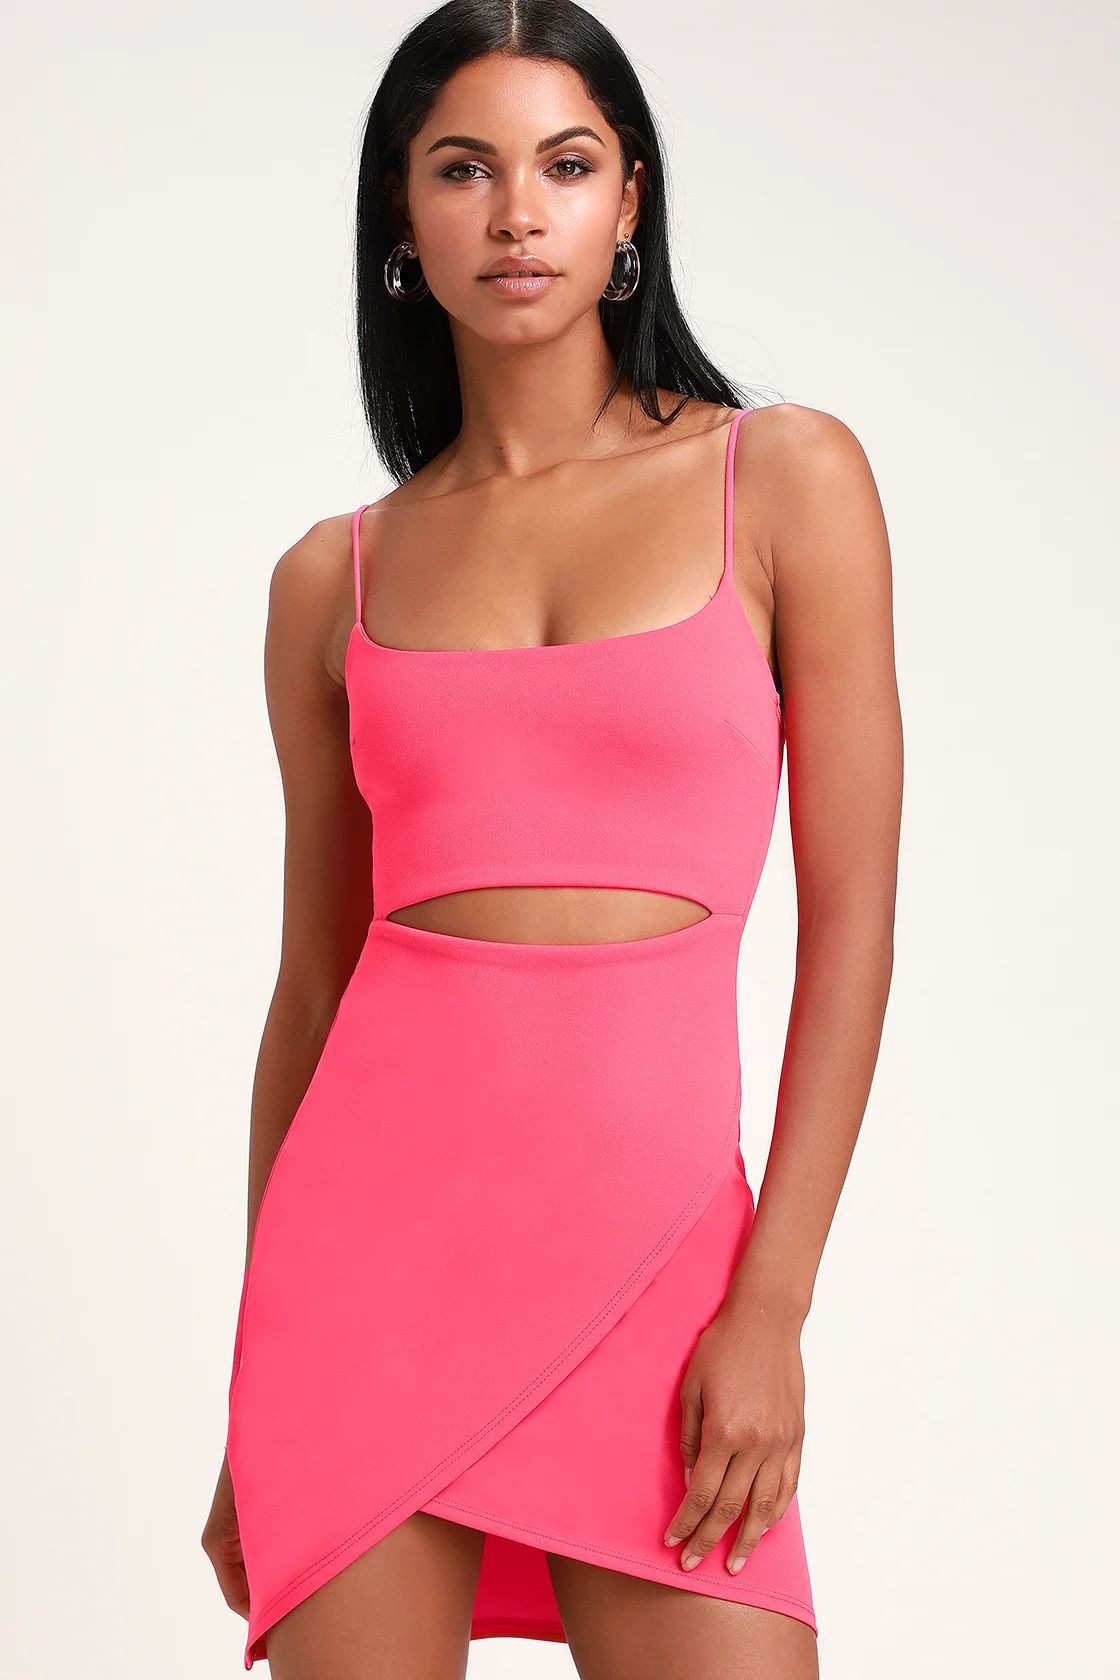 Cutout On The Town Hot Pink Cutout Bodycon Dress | Lulus (US)